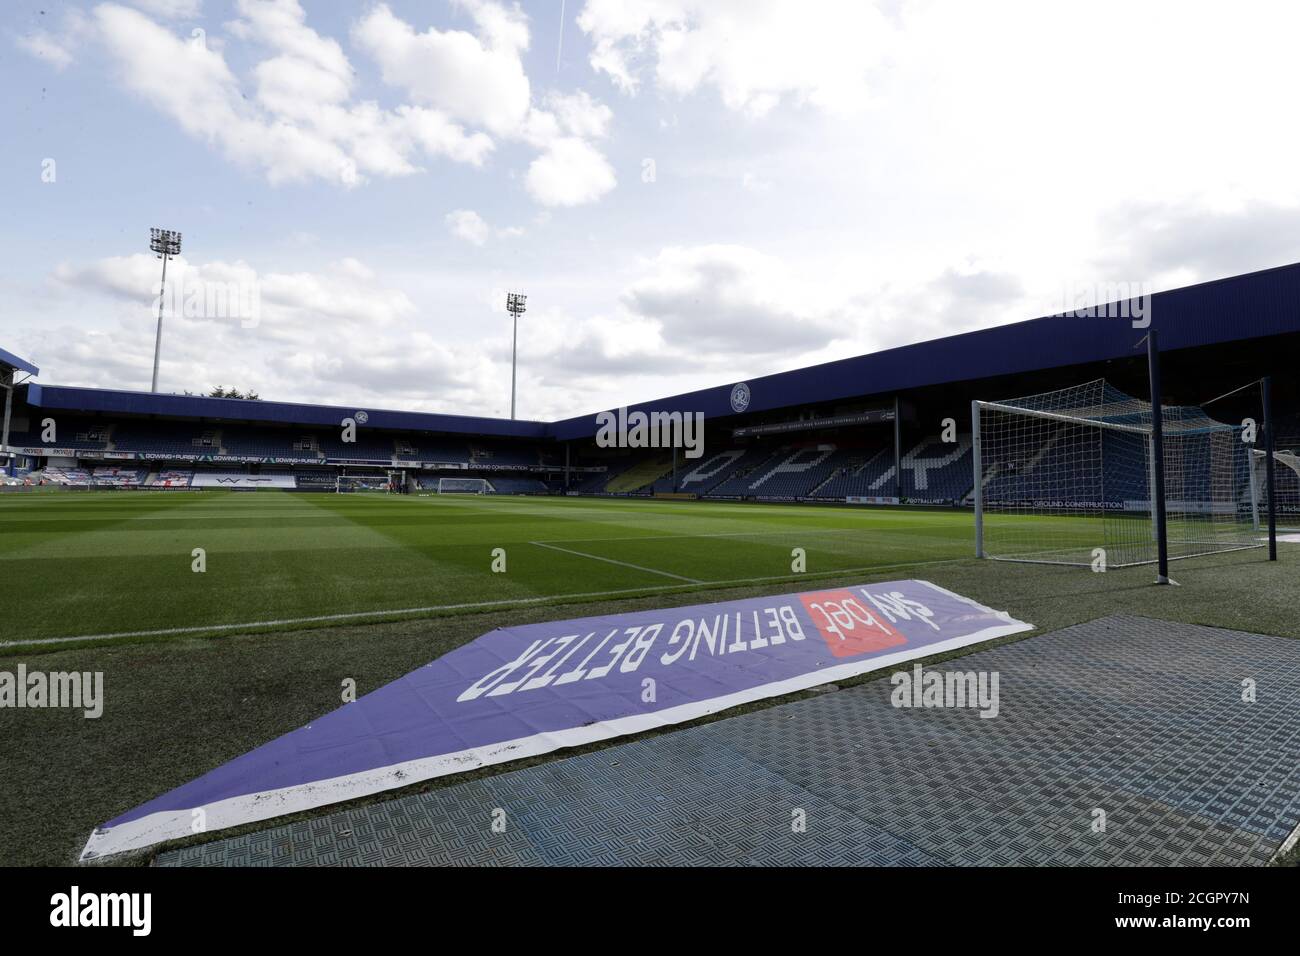 A general view of the The Kiyan Prince Foundation Stadium ahead of the Sky Bet Championship match between QPR and Nottingham Forest. Stock Photo